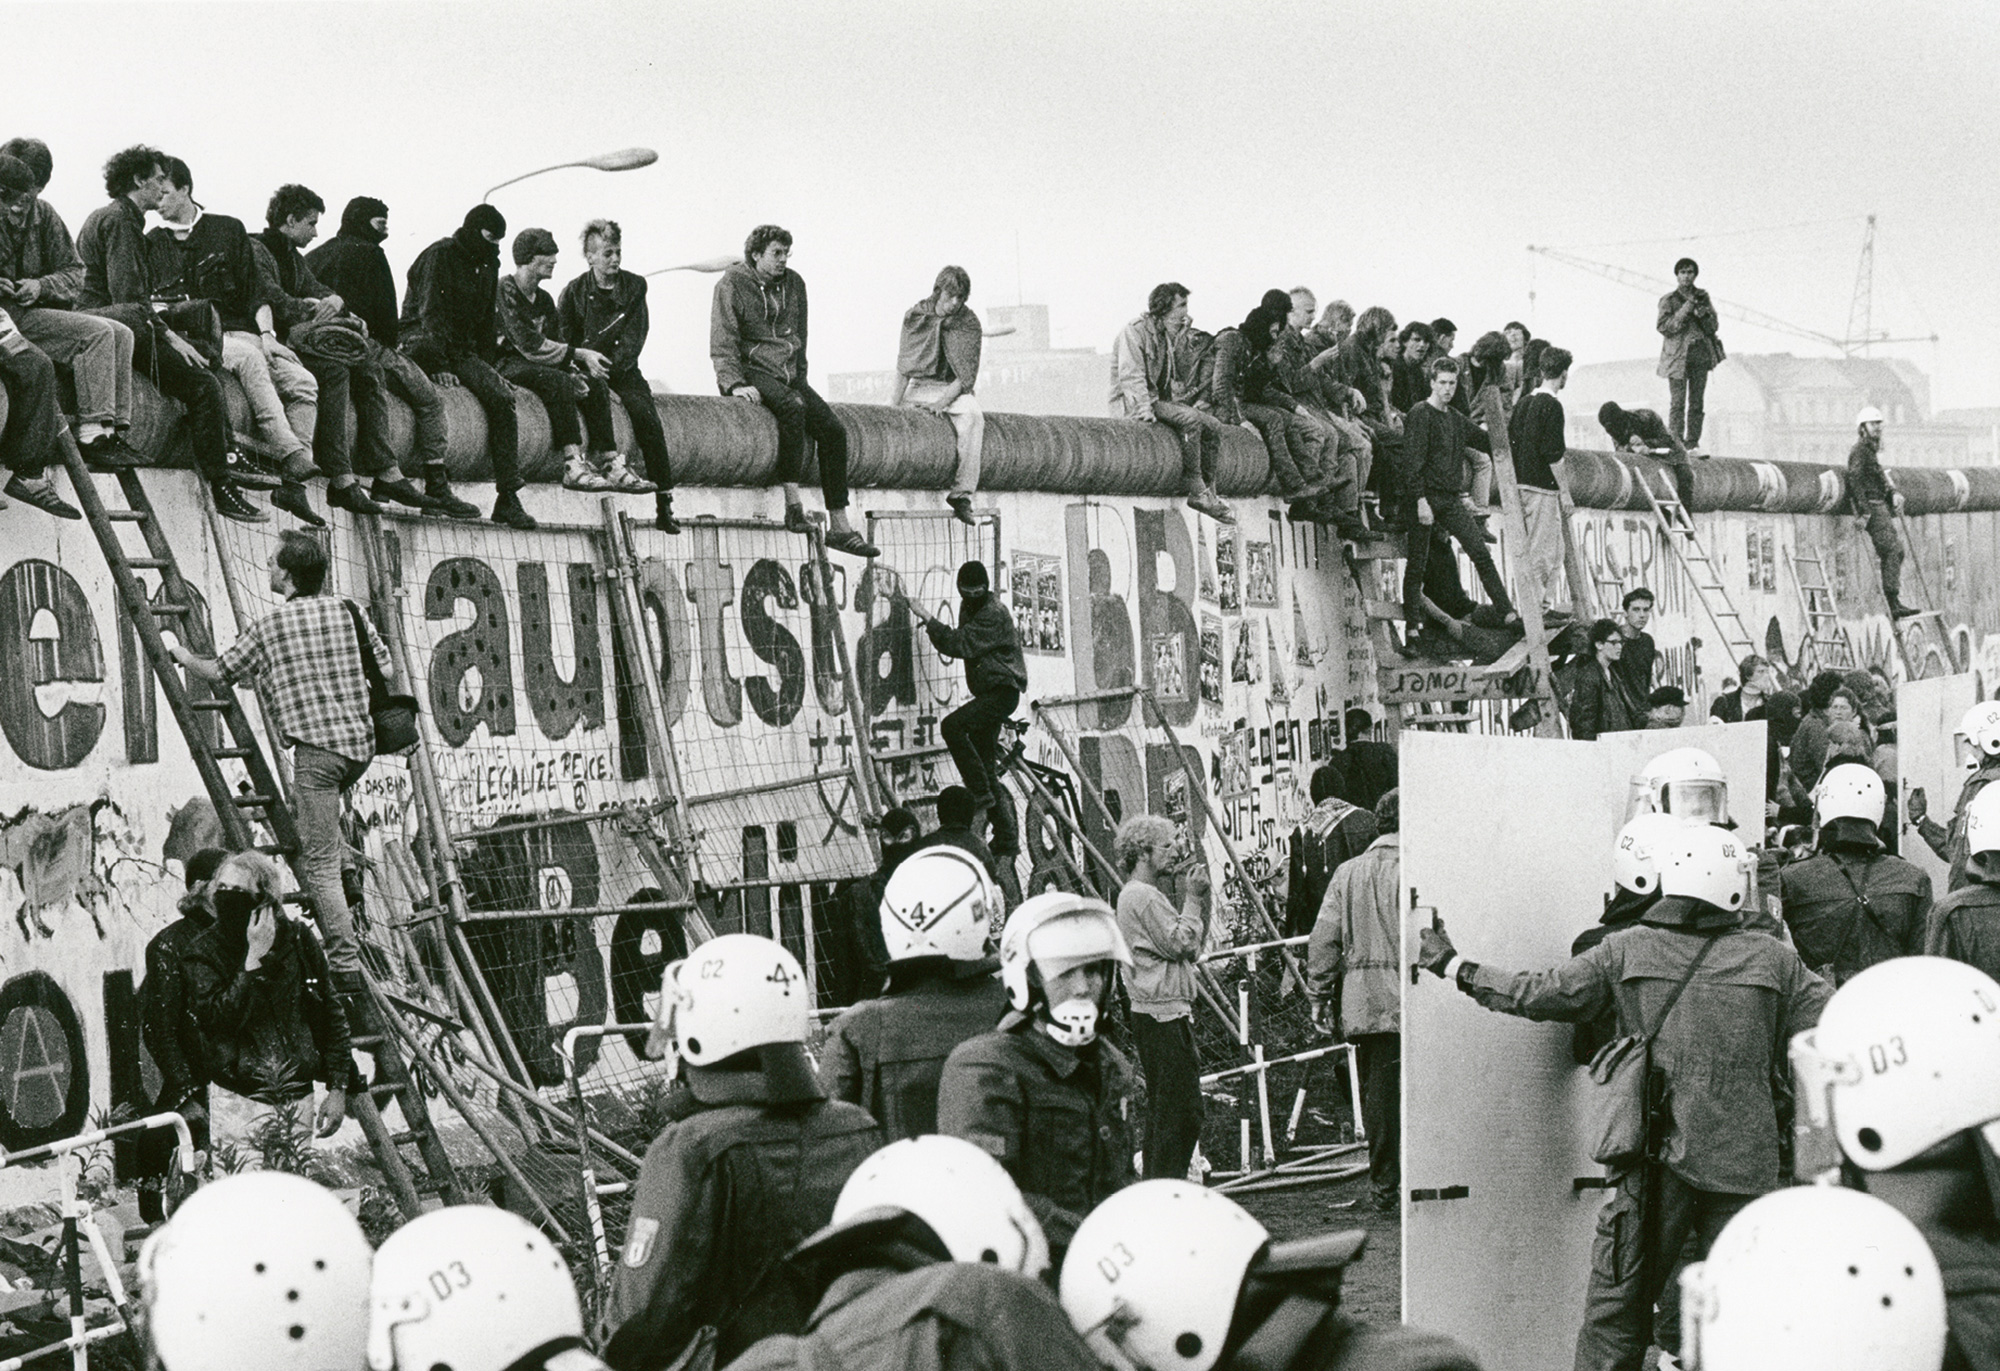 A photograph of protesters being met with police as they climbed the wall into East Berlin on the 1st of July nineteen eighty-eight.